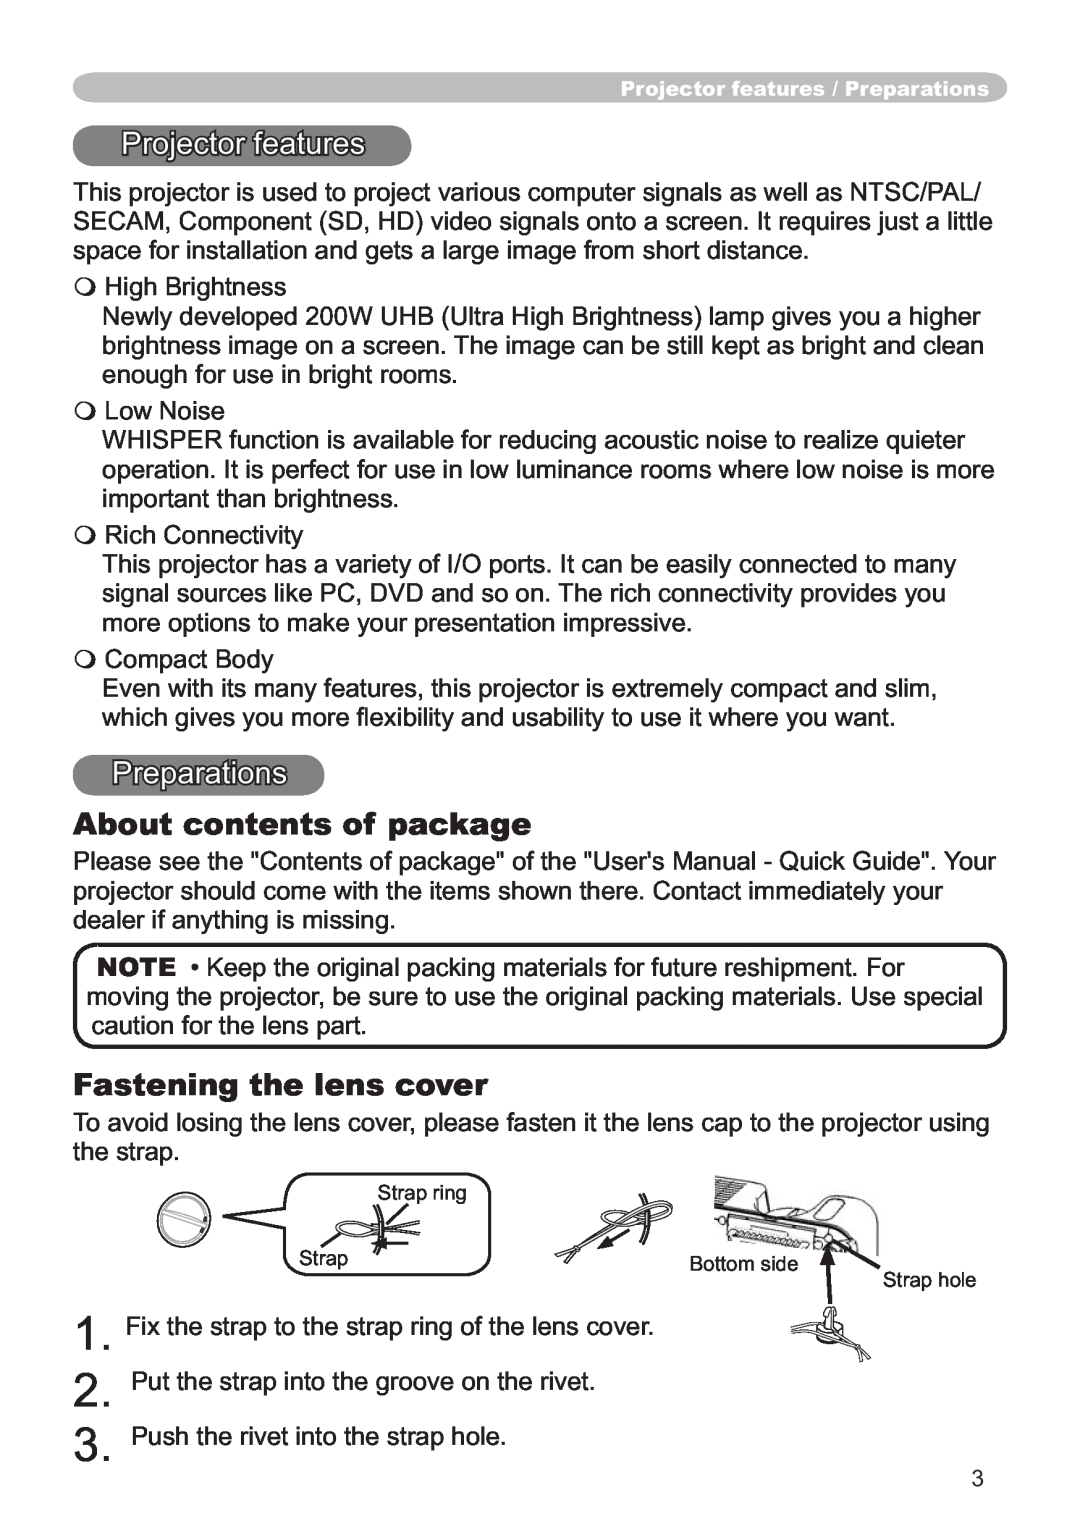 Hitachi ED-X12 user manual 1 2, Projector features, Preparations, About contents of package, Fastening the lens cover 